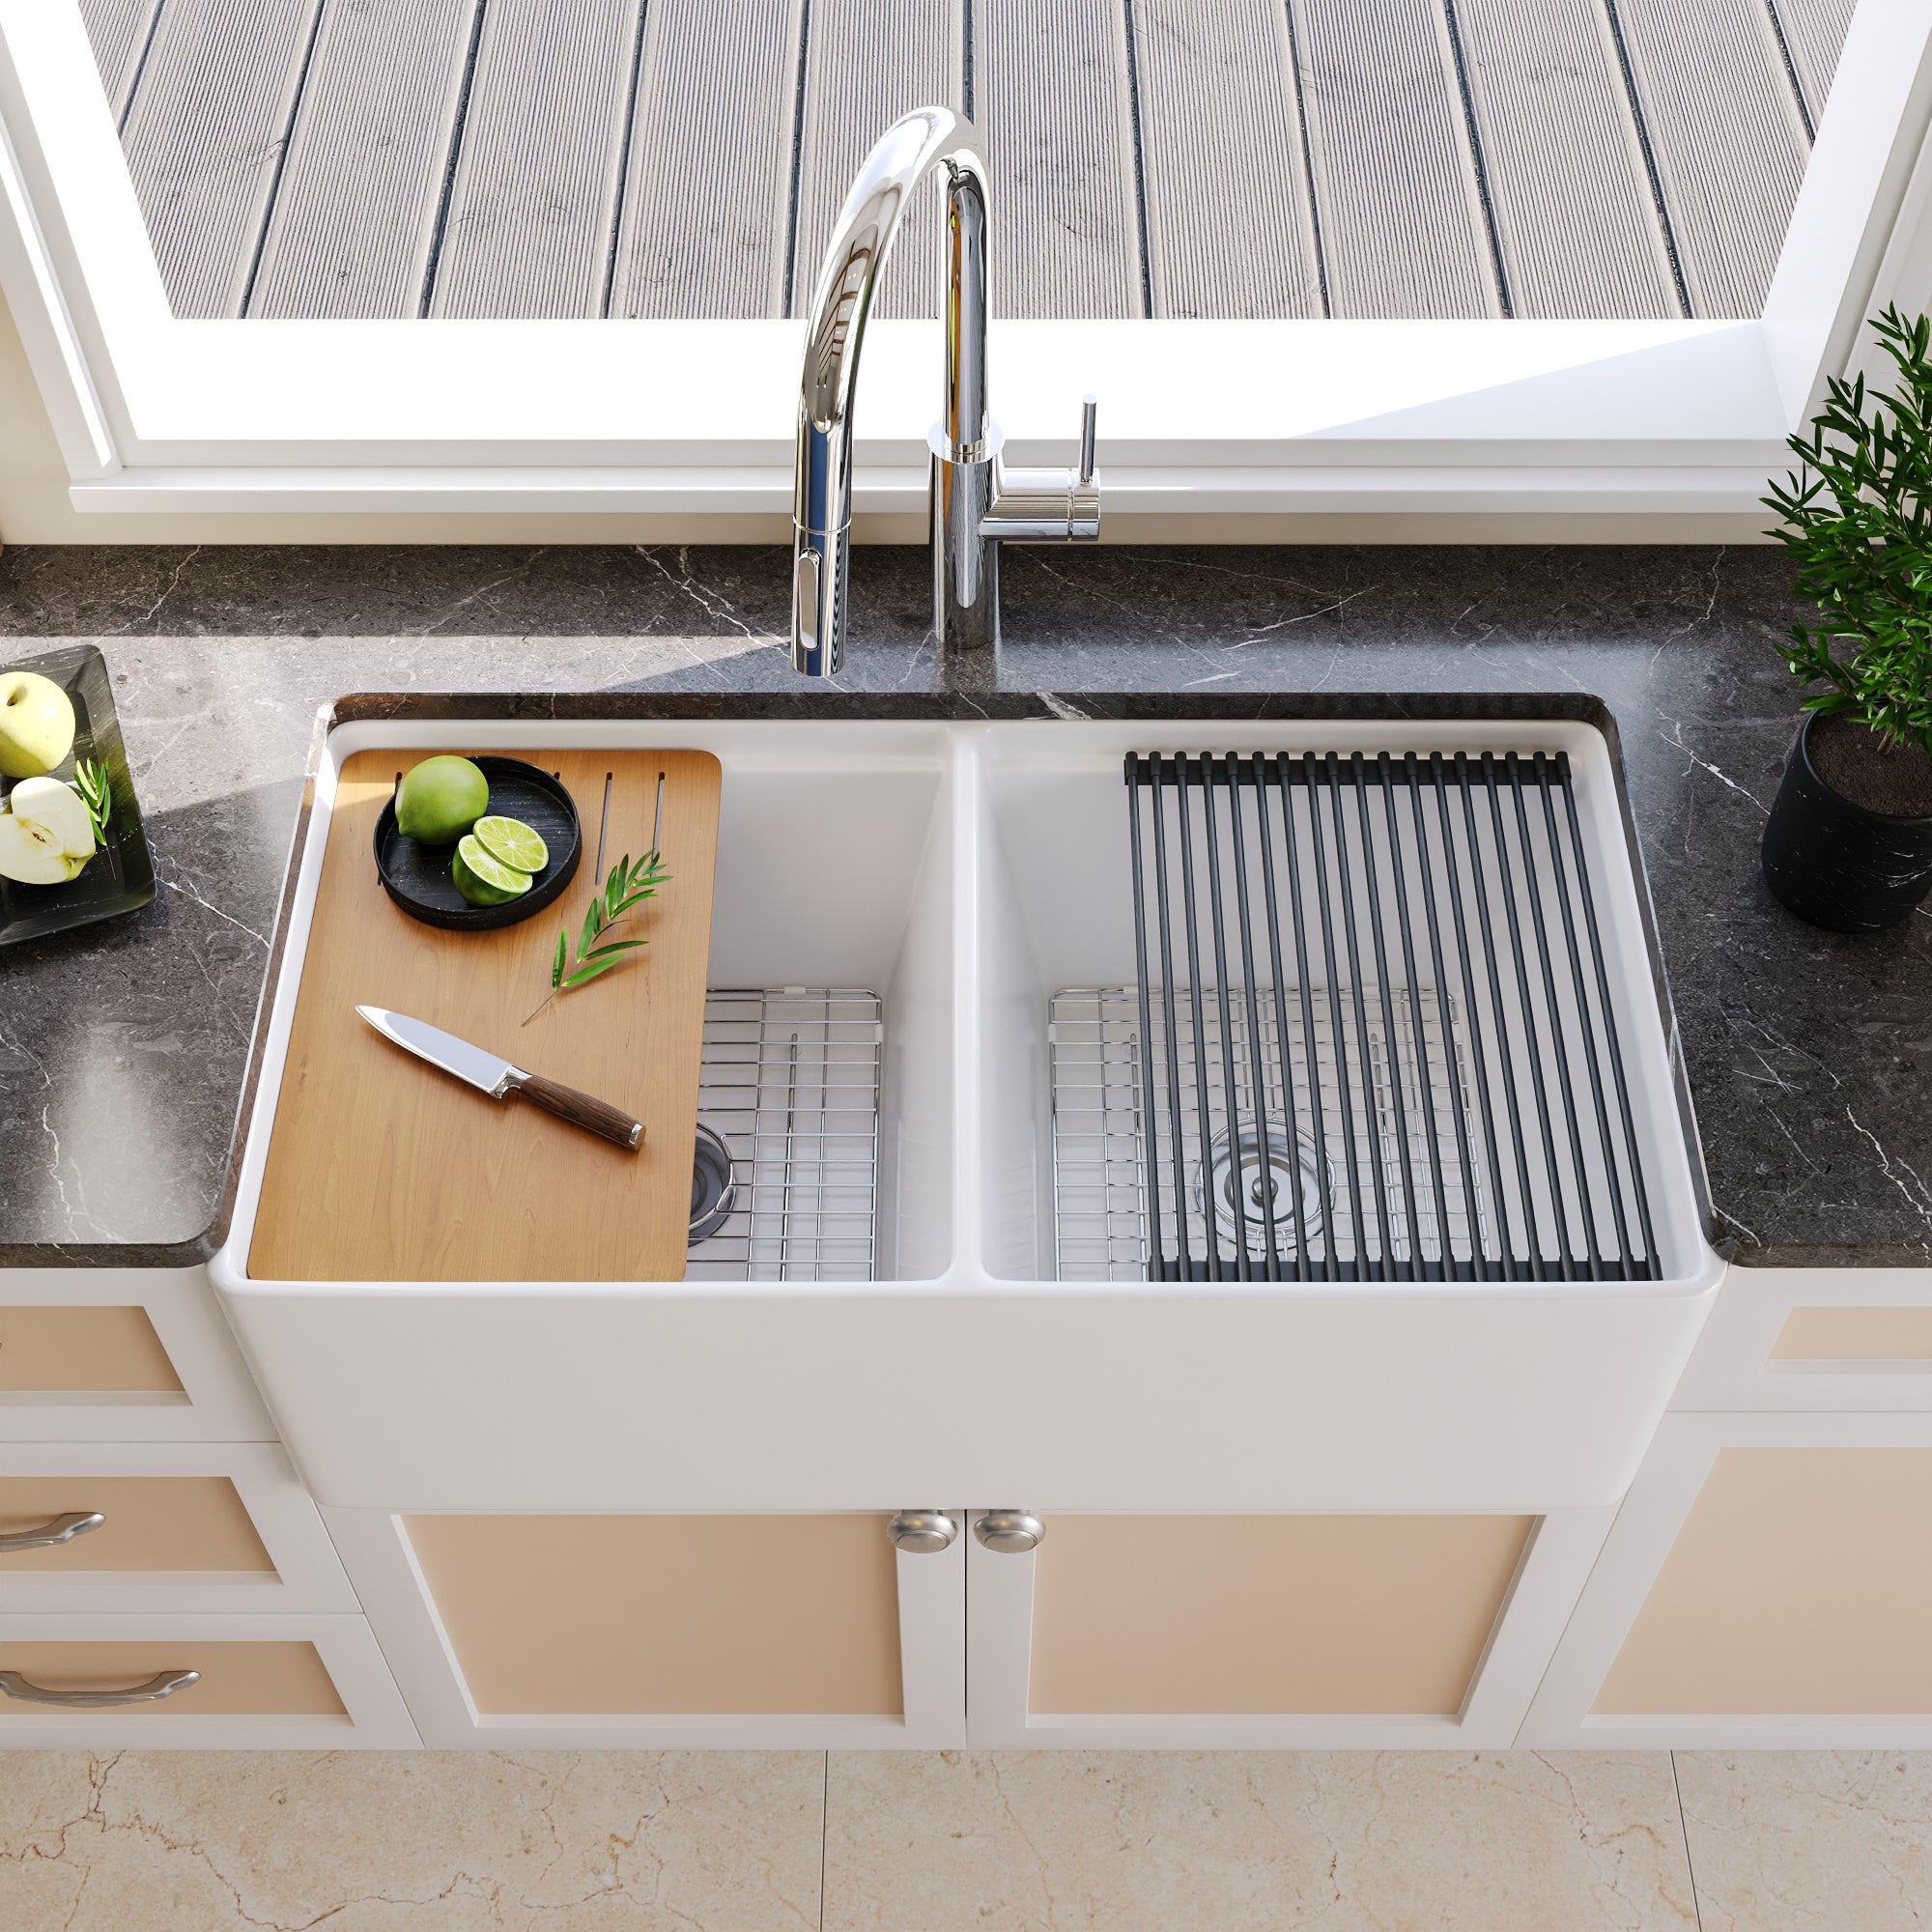 DeerValley Dv-1k026 Ceramic Farmhouse Kitchen Sink with Grid and Strainer,30 inch L x 18 inch W x 10 inch H, Size: One Size